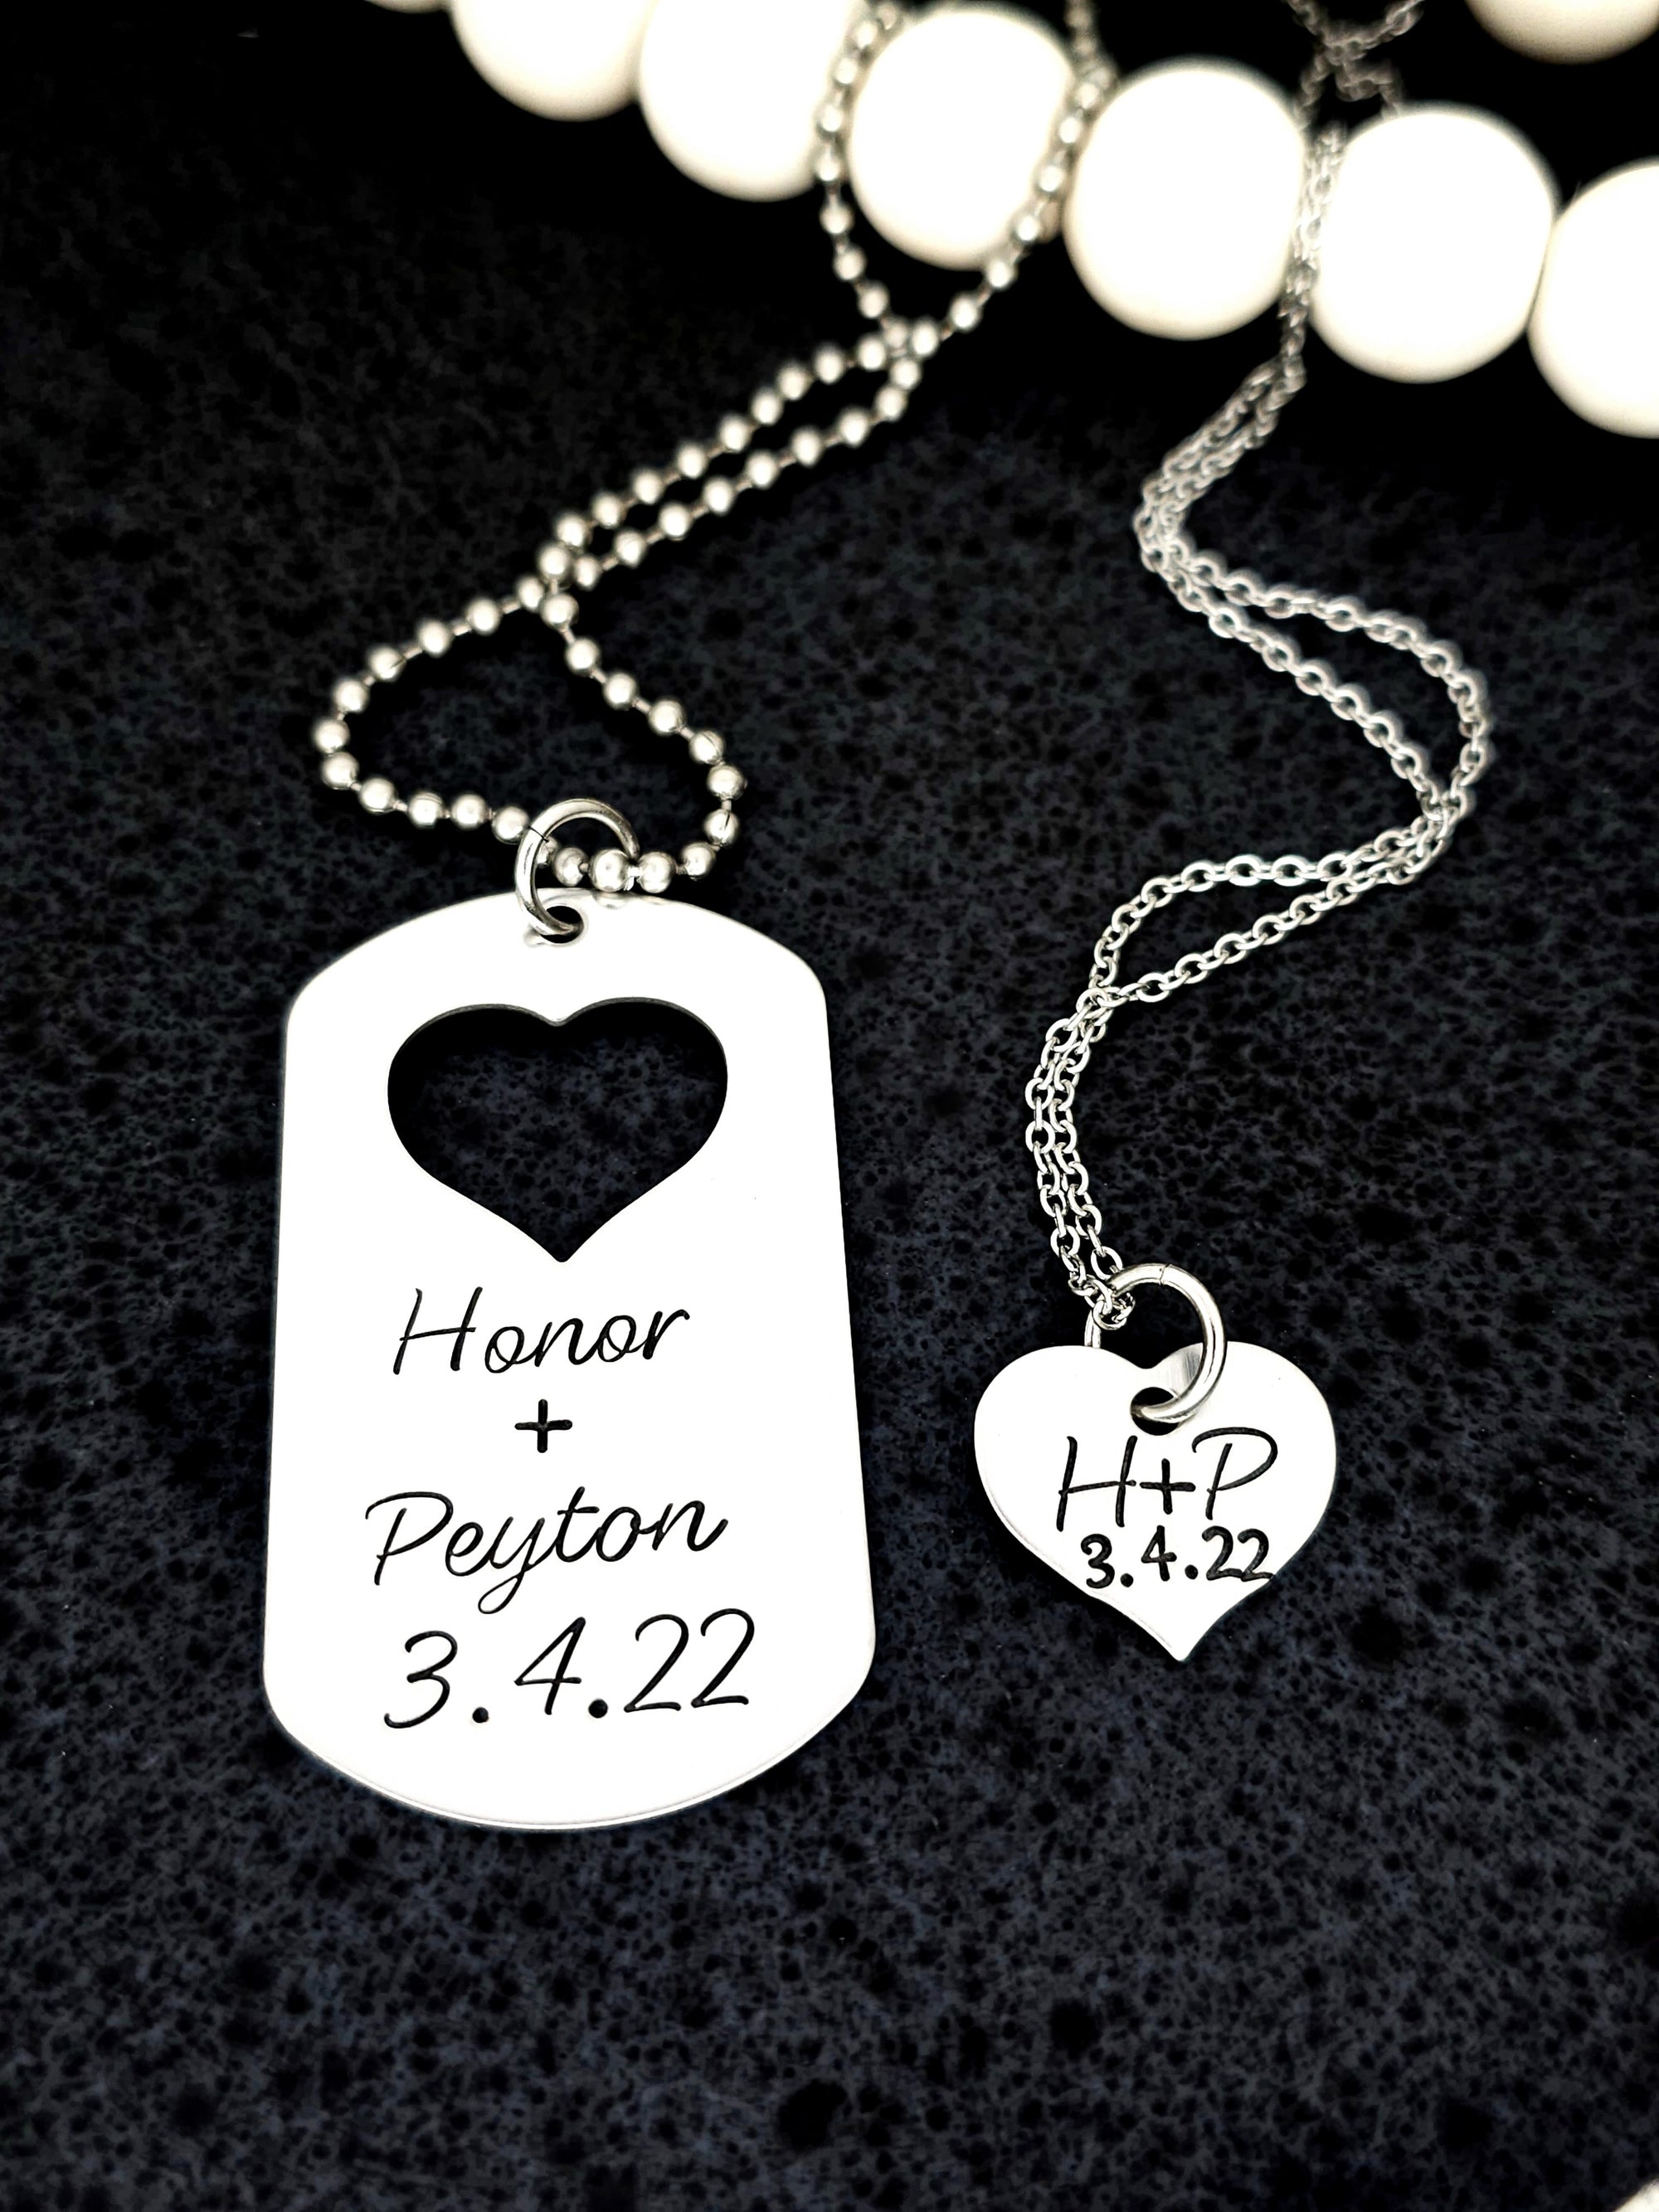 Couple's Necklace Set, Carry Your Heart, Dog Tag Necklace, Heart Jewelry, Forever and Ever, Match